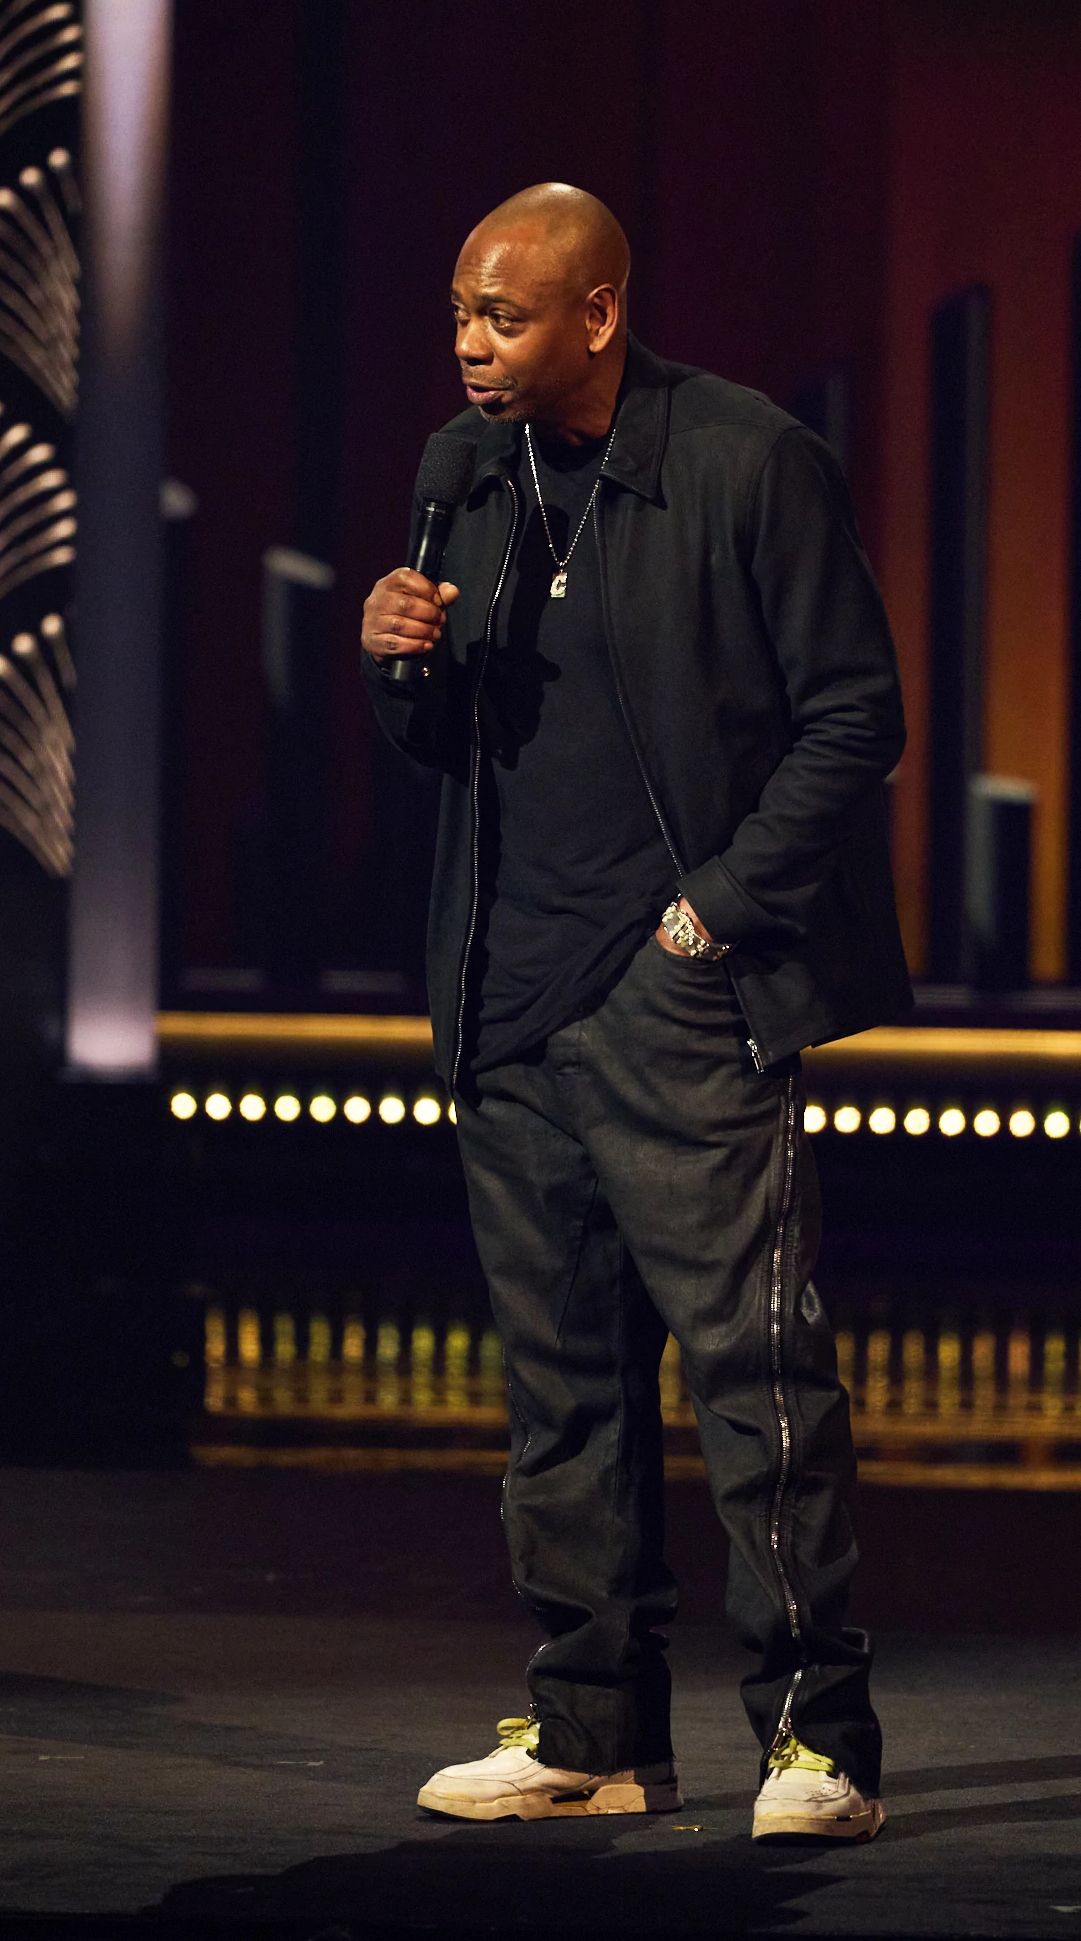 Dave Chappelle speaking into a microphone onstage at the 25th Annual Mark Twain Prize For American Humor